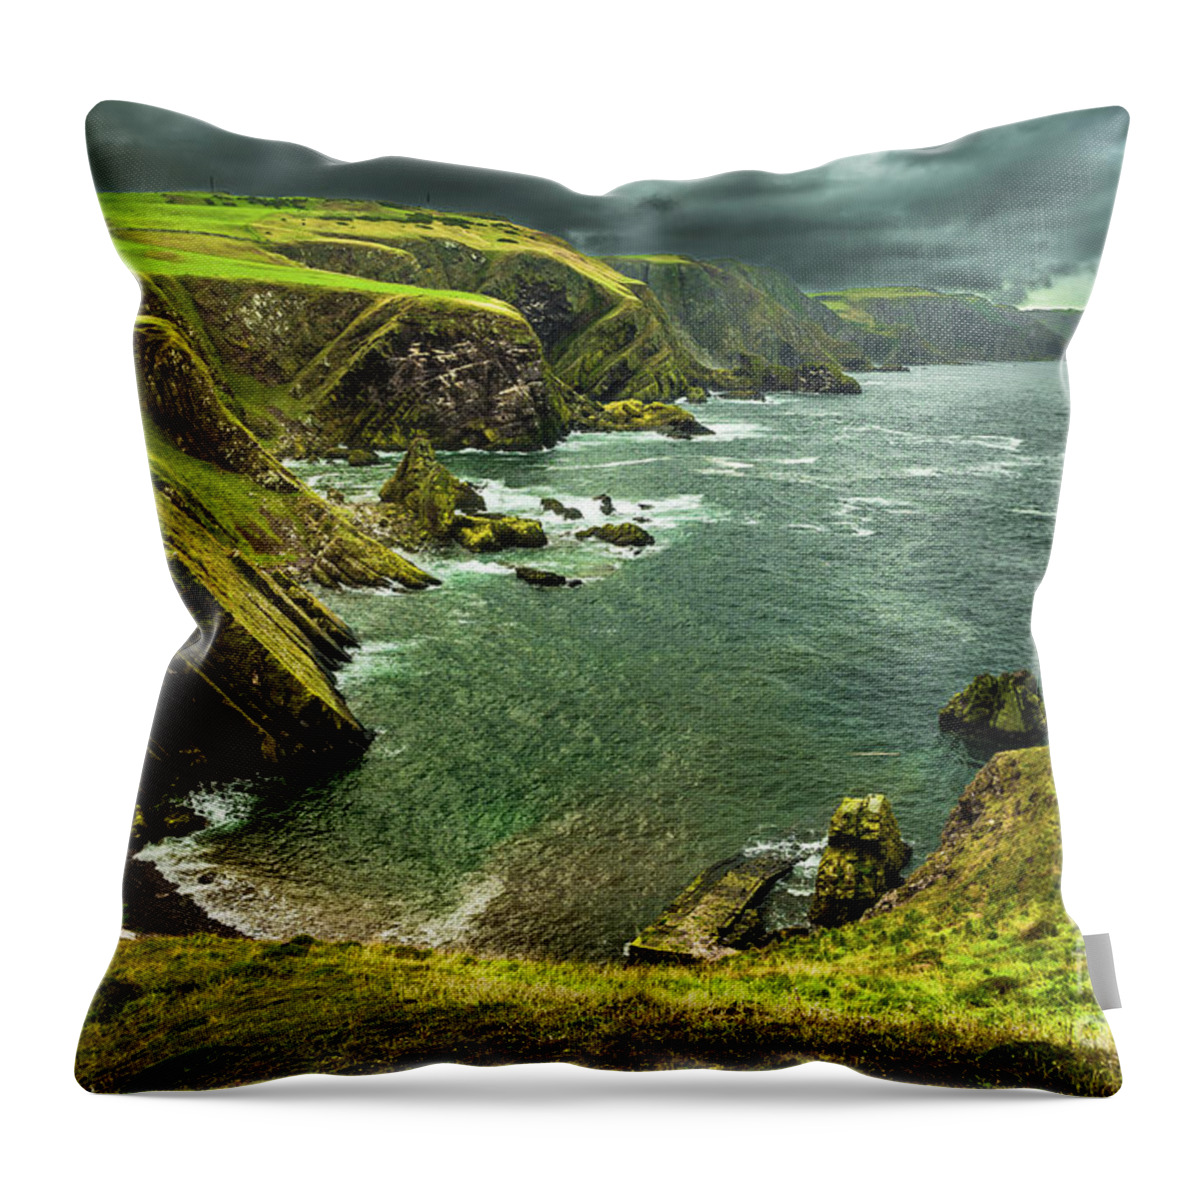 Agriculture Throw Pillow featuring the photograph Spectacular Atlantik Coast And Cliffs At St. Abbs Head in Scotland by Andreas Berthold